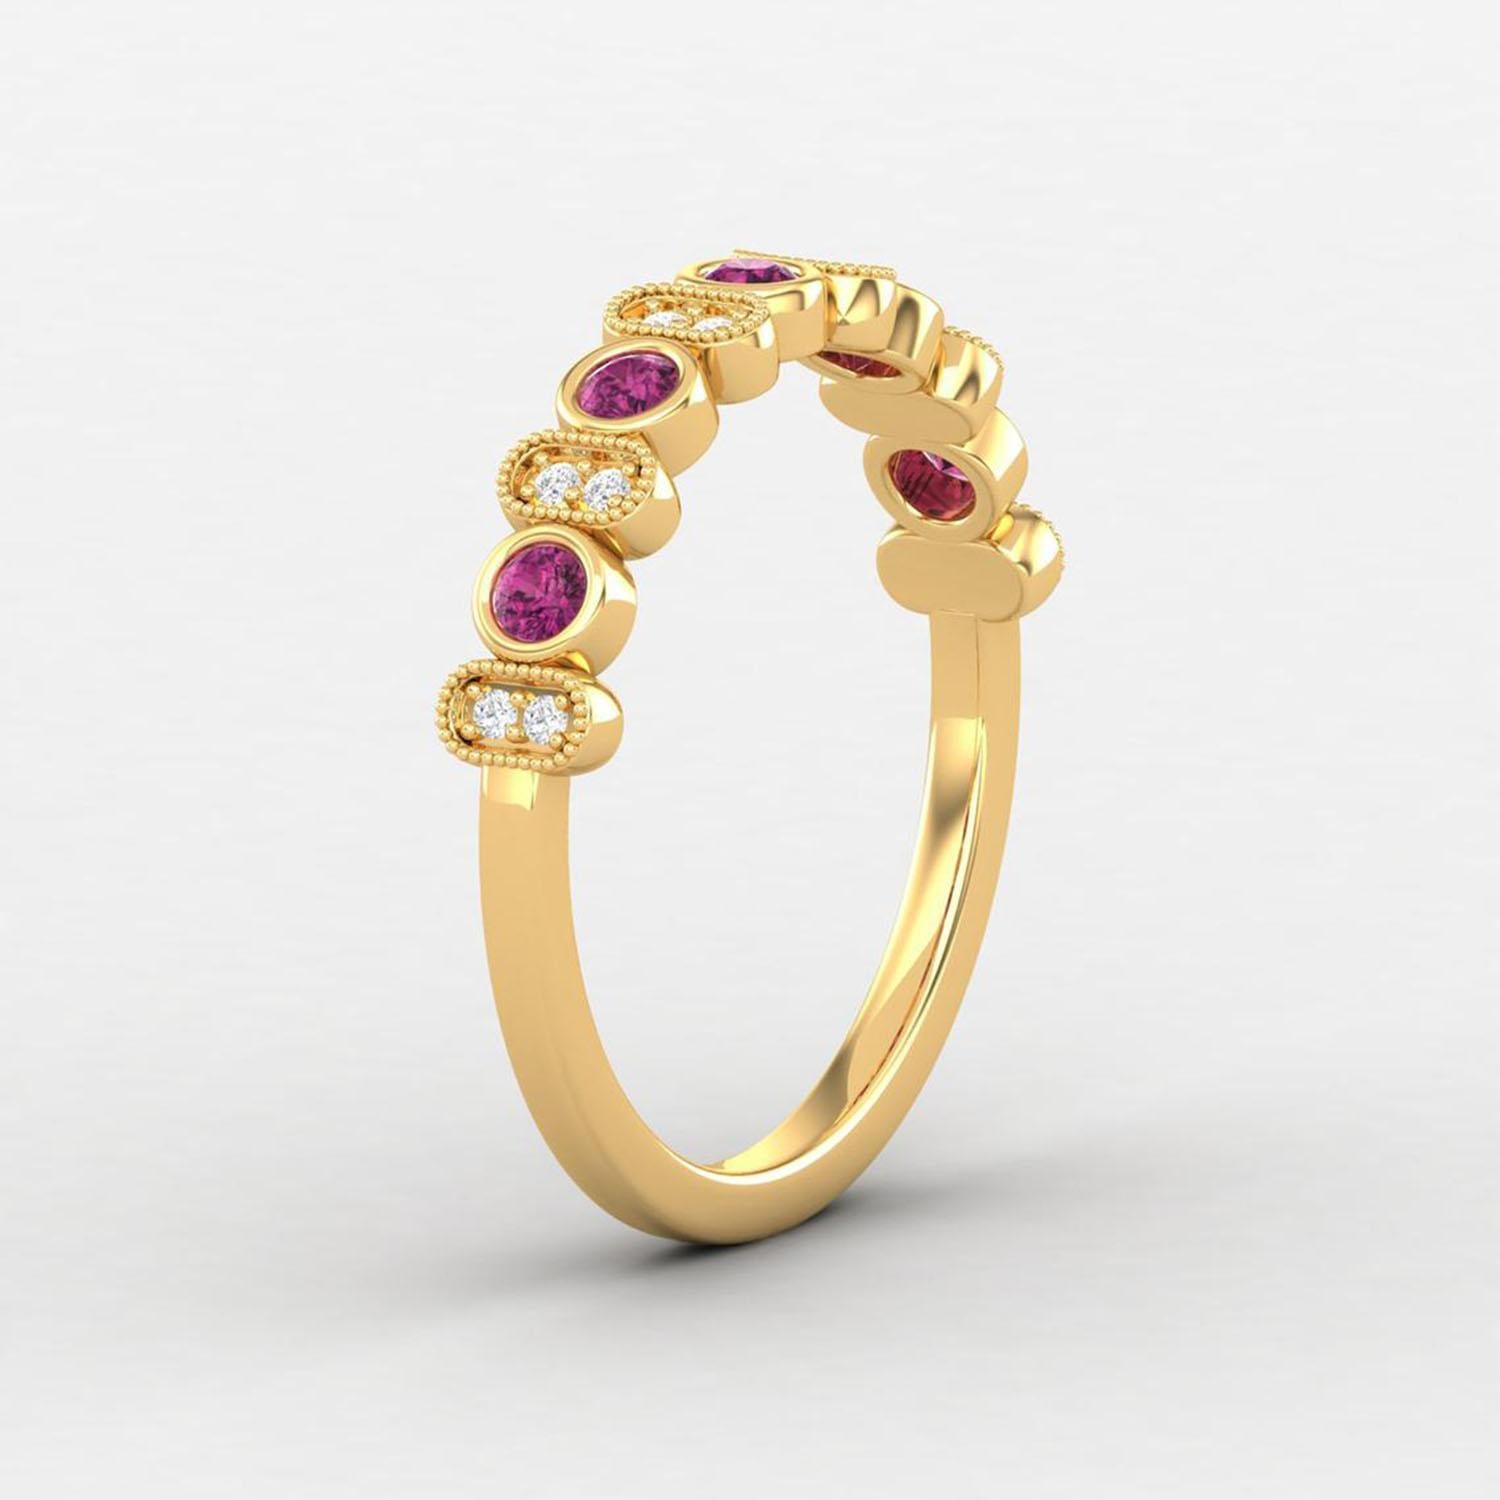 14 K Gold Diamond Ring / Rubellite Tourmaline Ring / Cluster Band For Sale 2